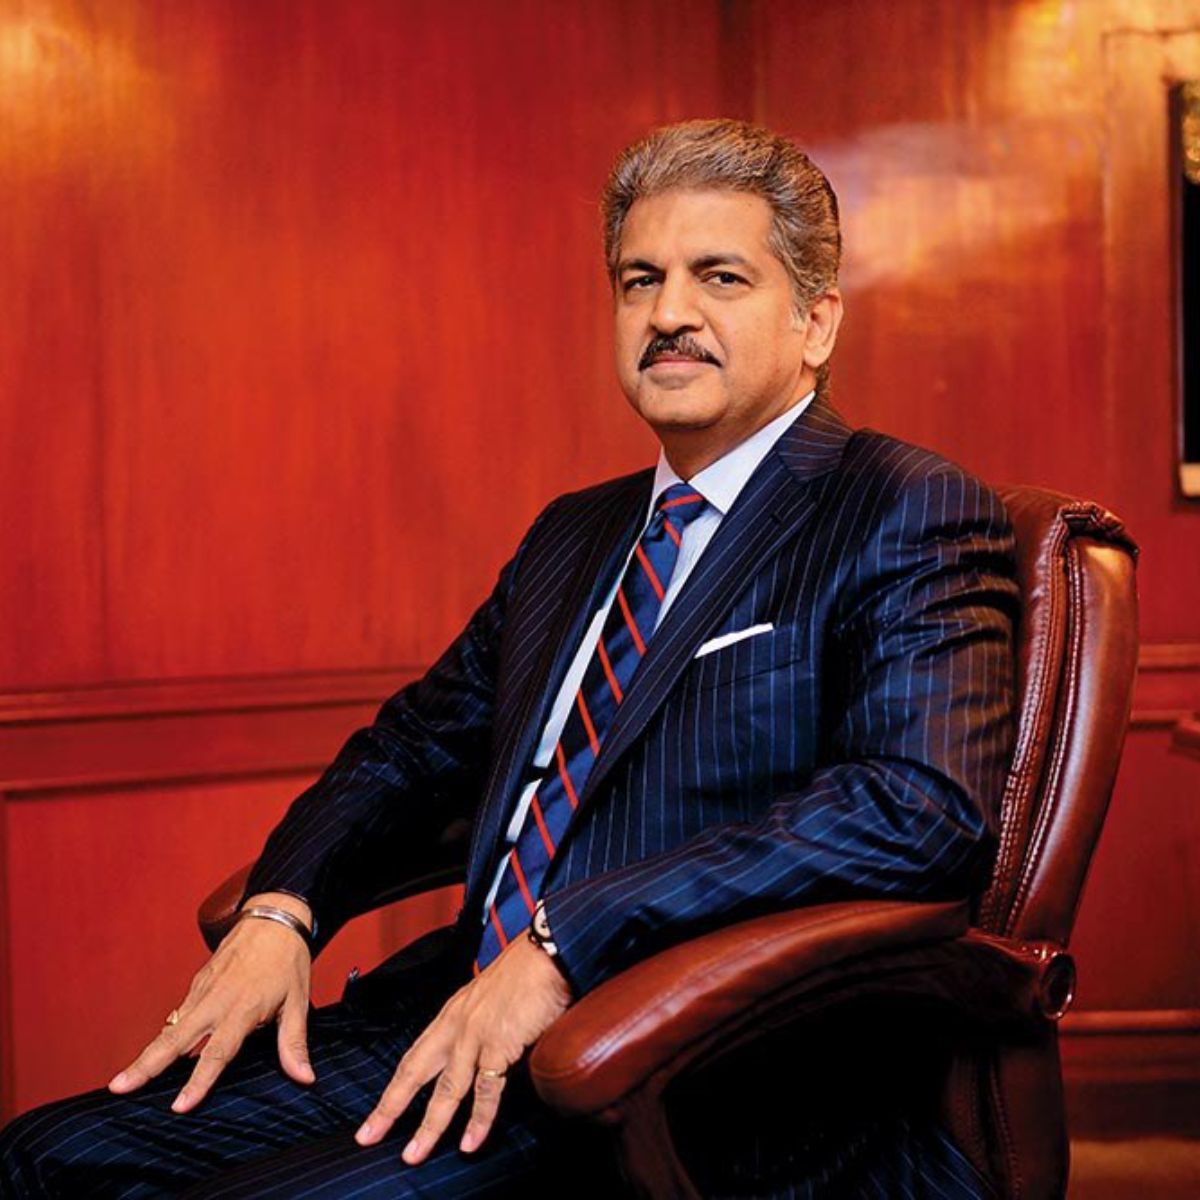 Not impressed: Anand Mahindra’s tweet gets a stormy response